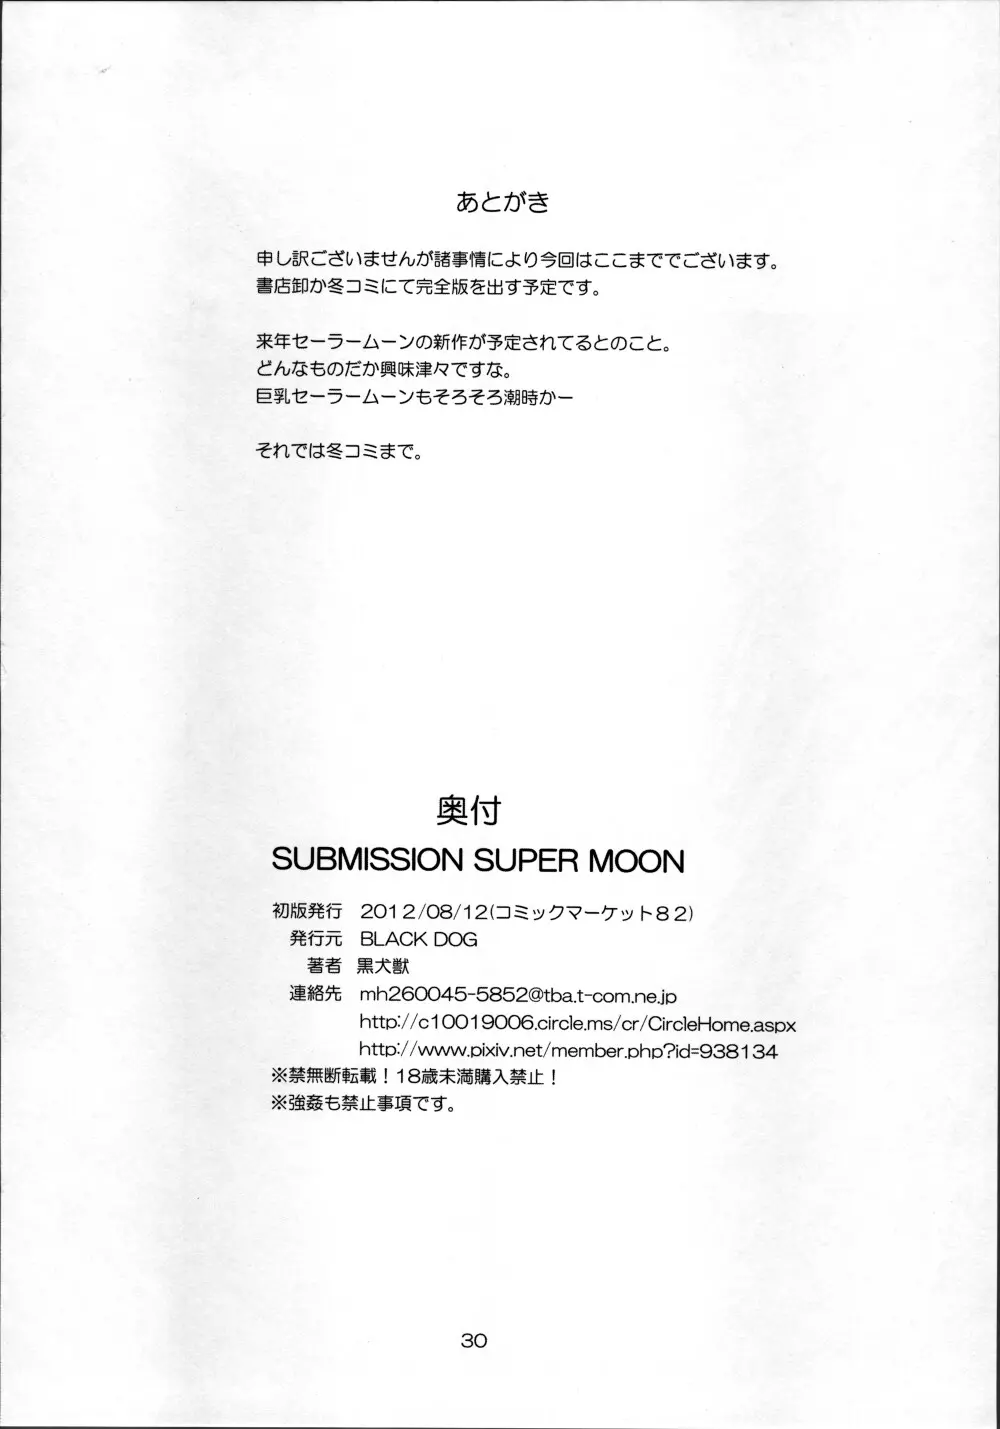 SUBMISSION-SUPER MOON 暫定版 30ページ